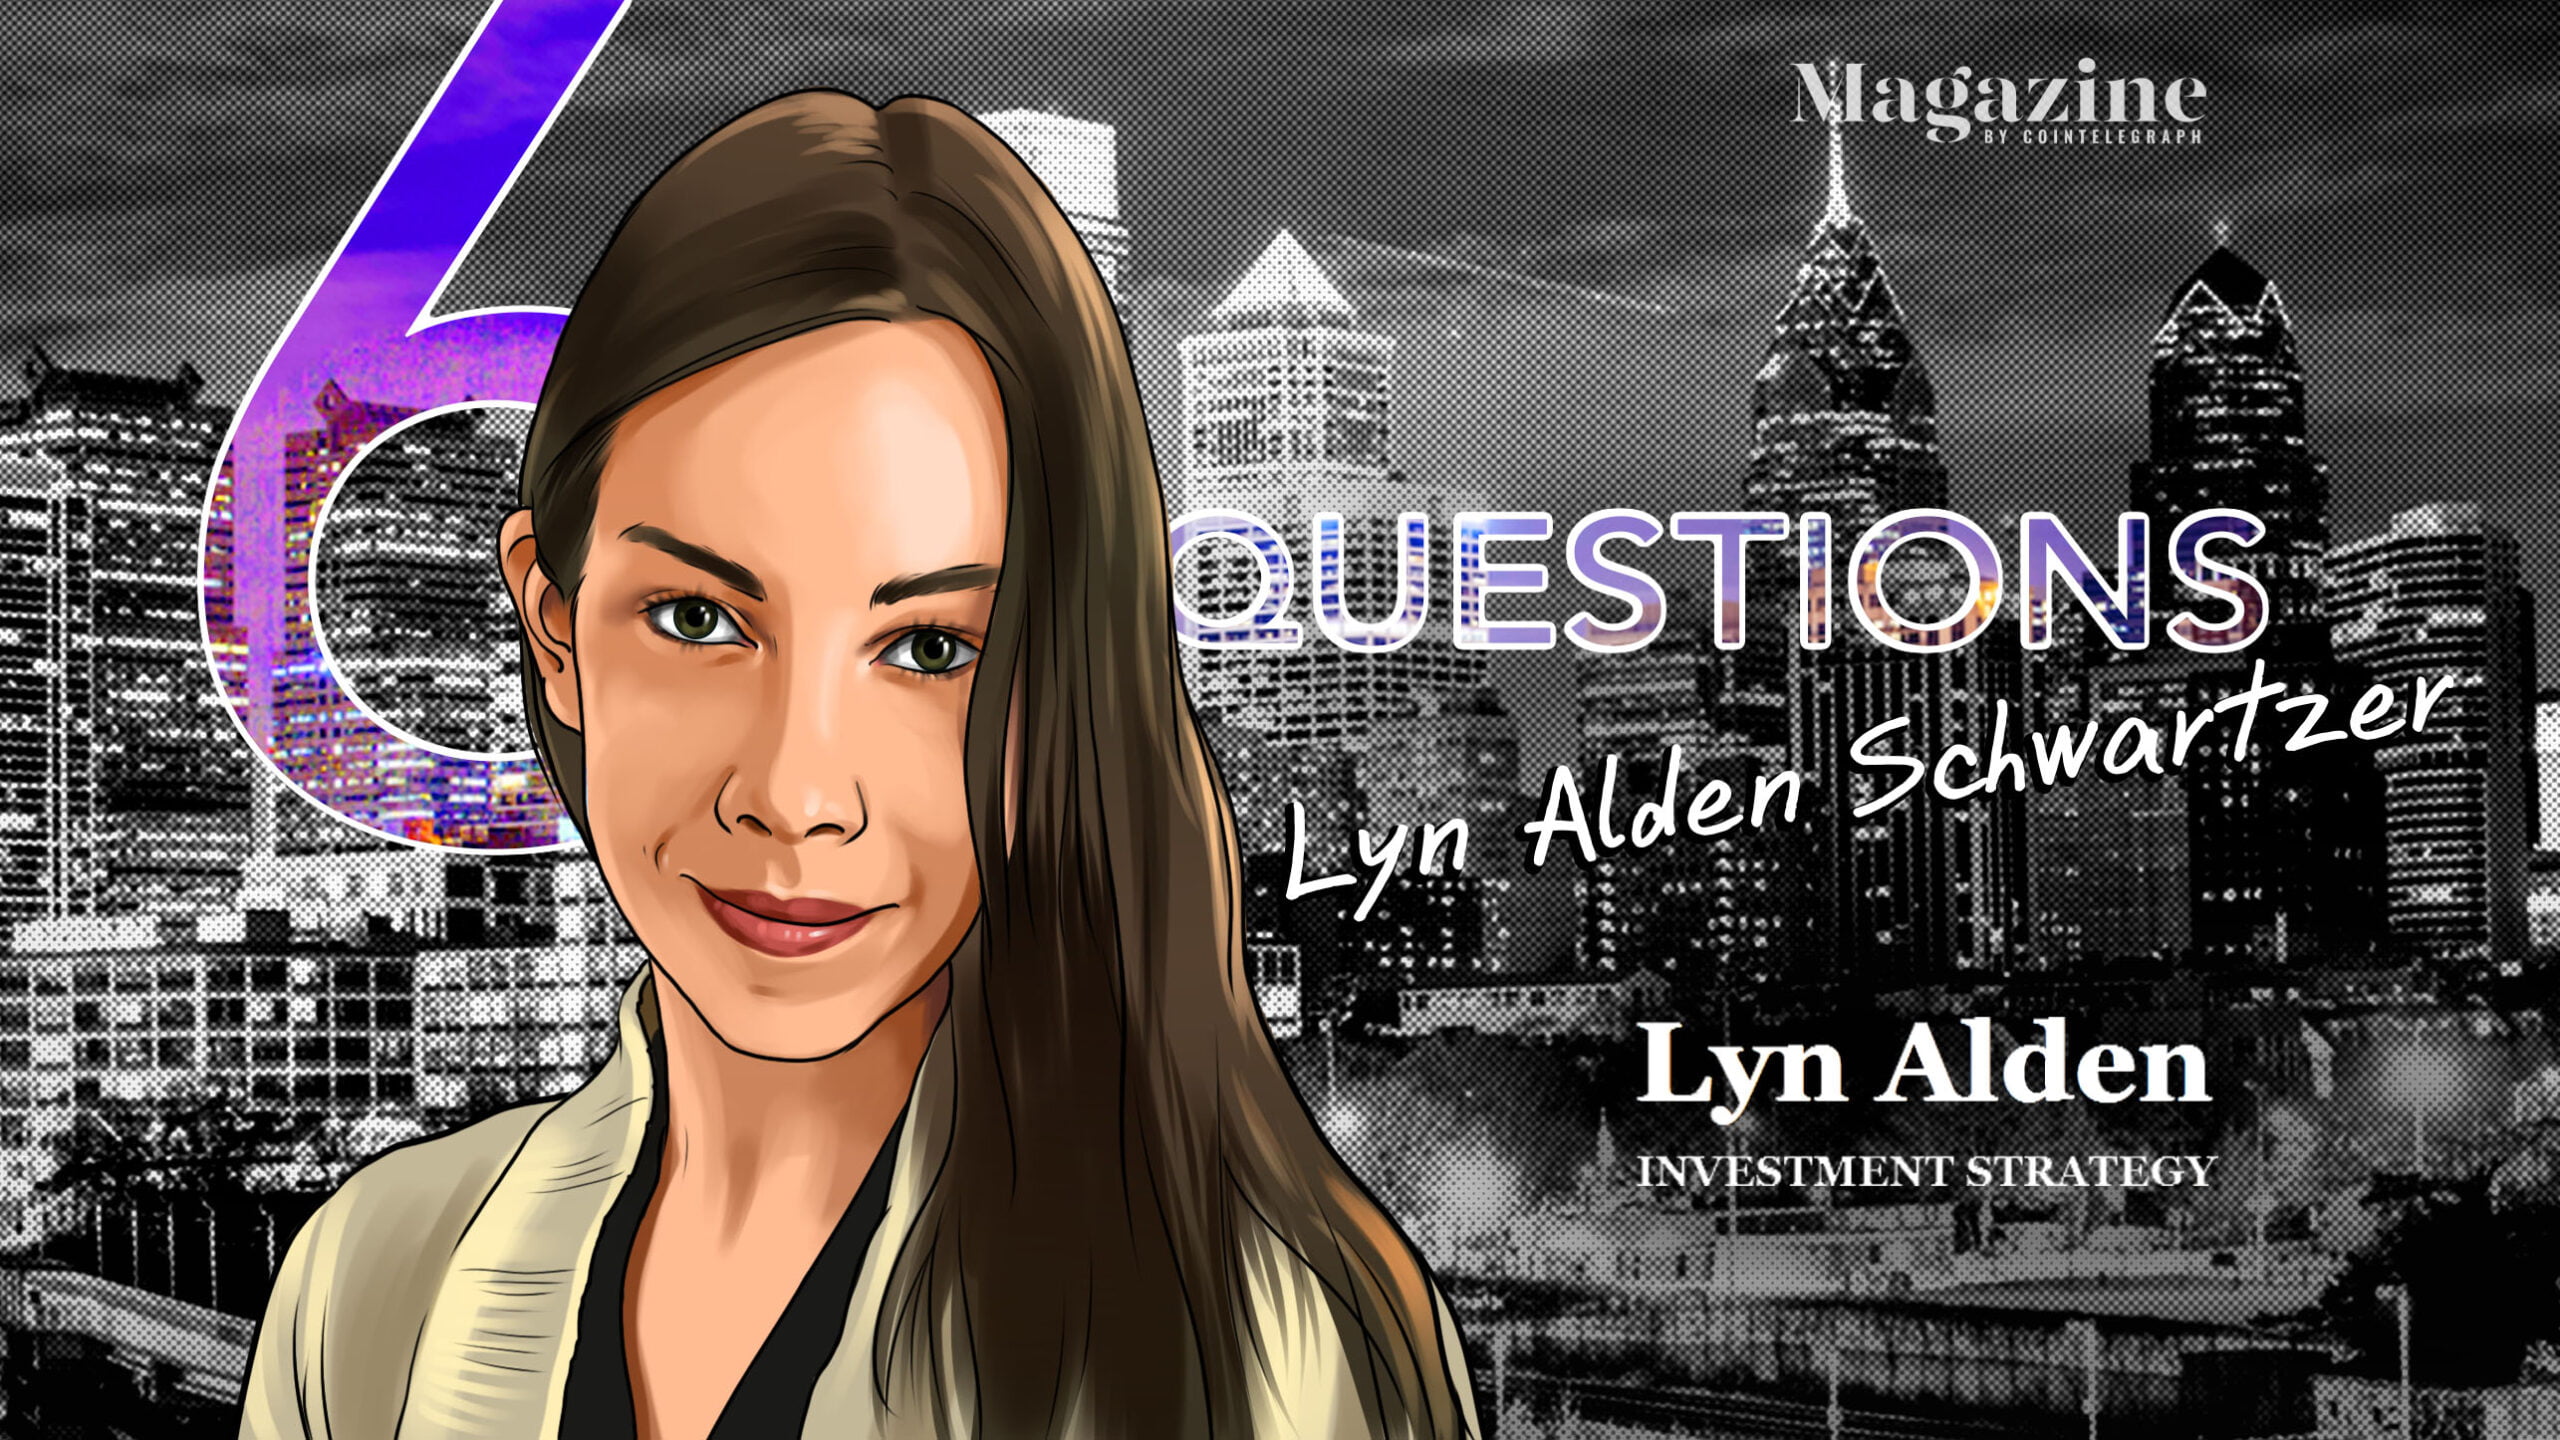 6 Questions for Lyn Alden Schwartzer of Lyn Alden Investment Strategy